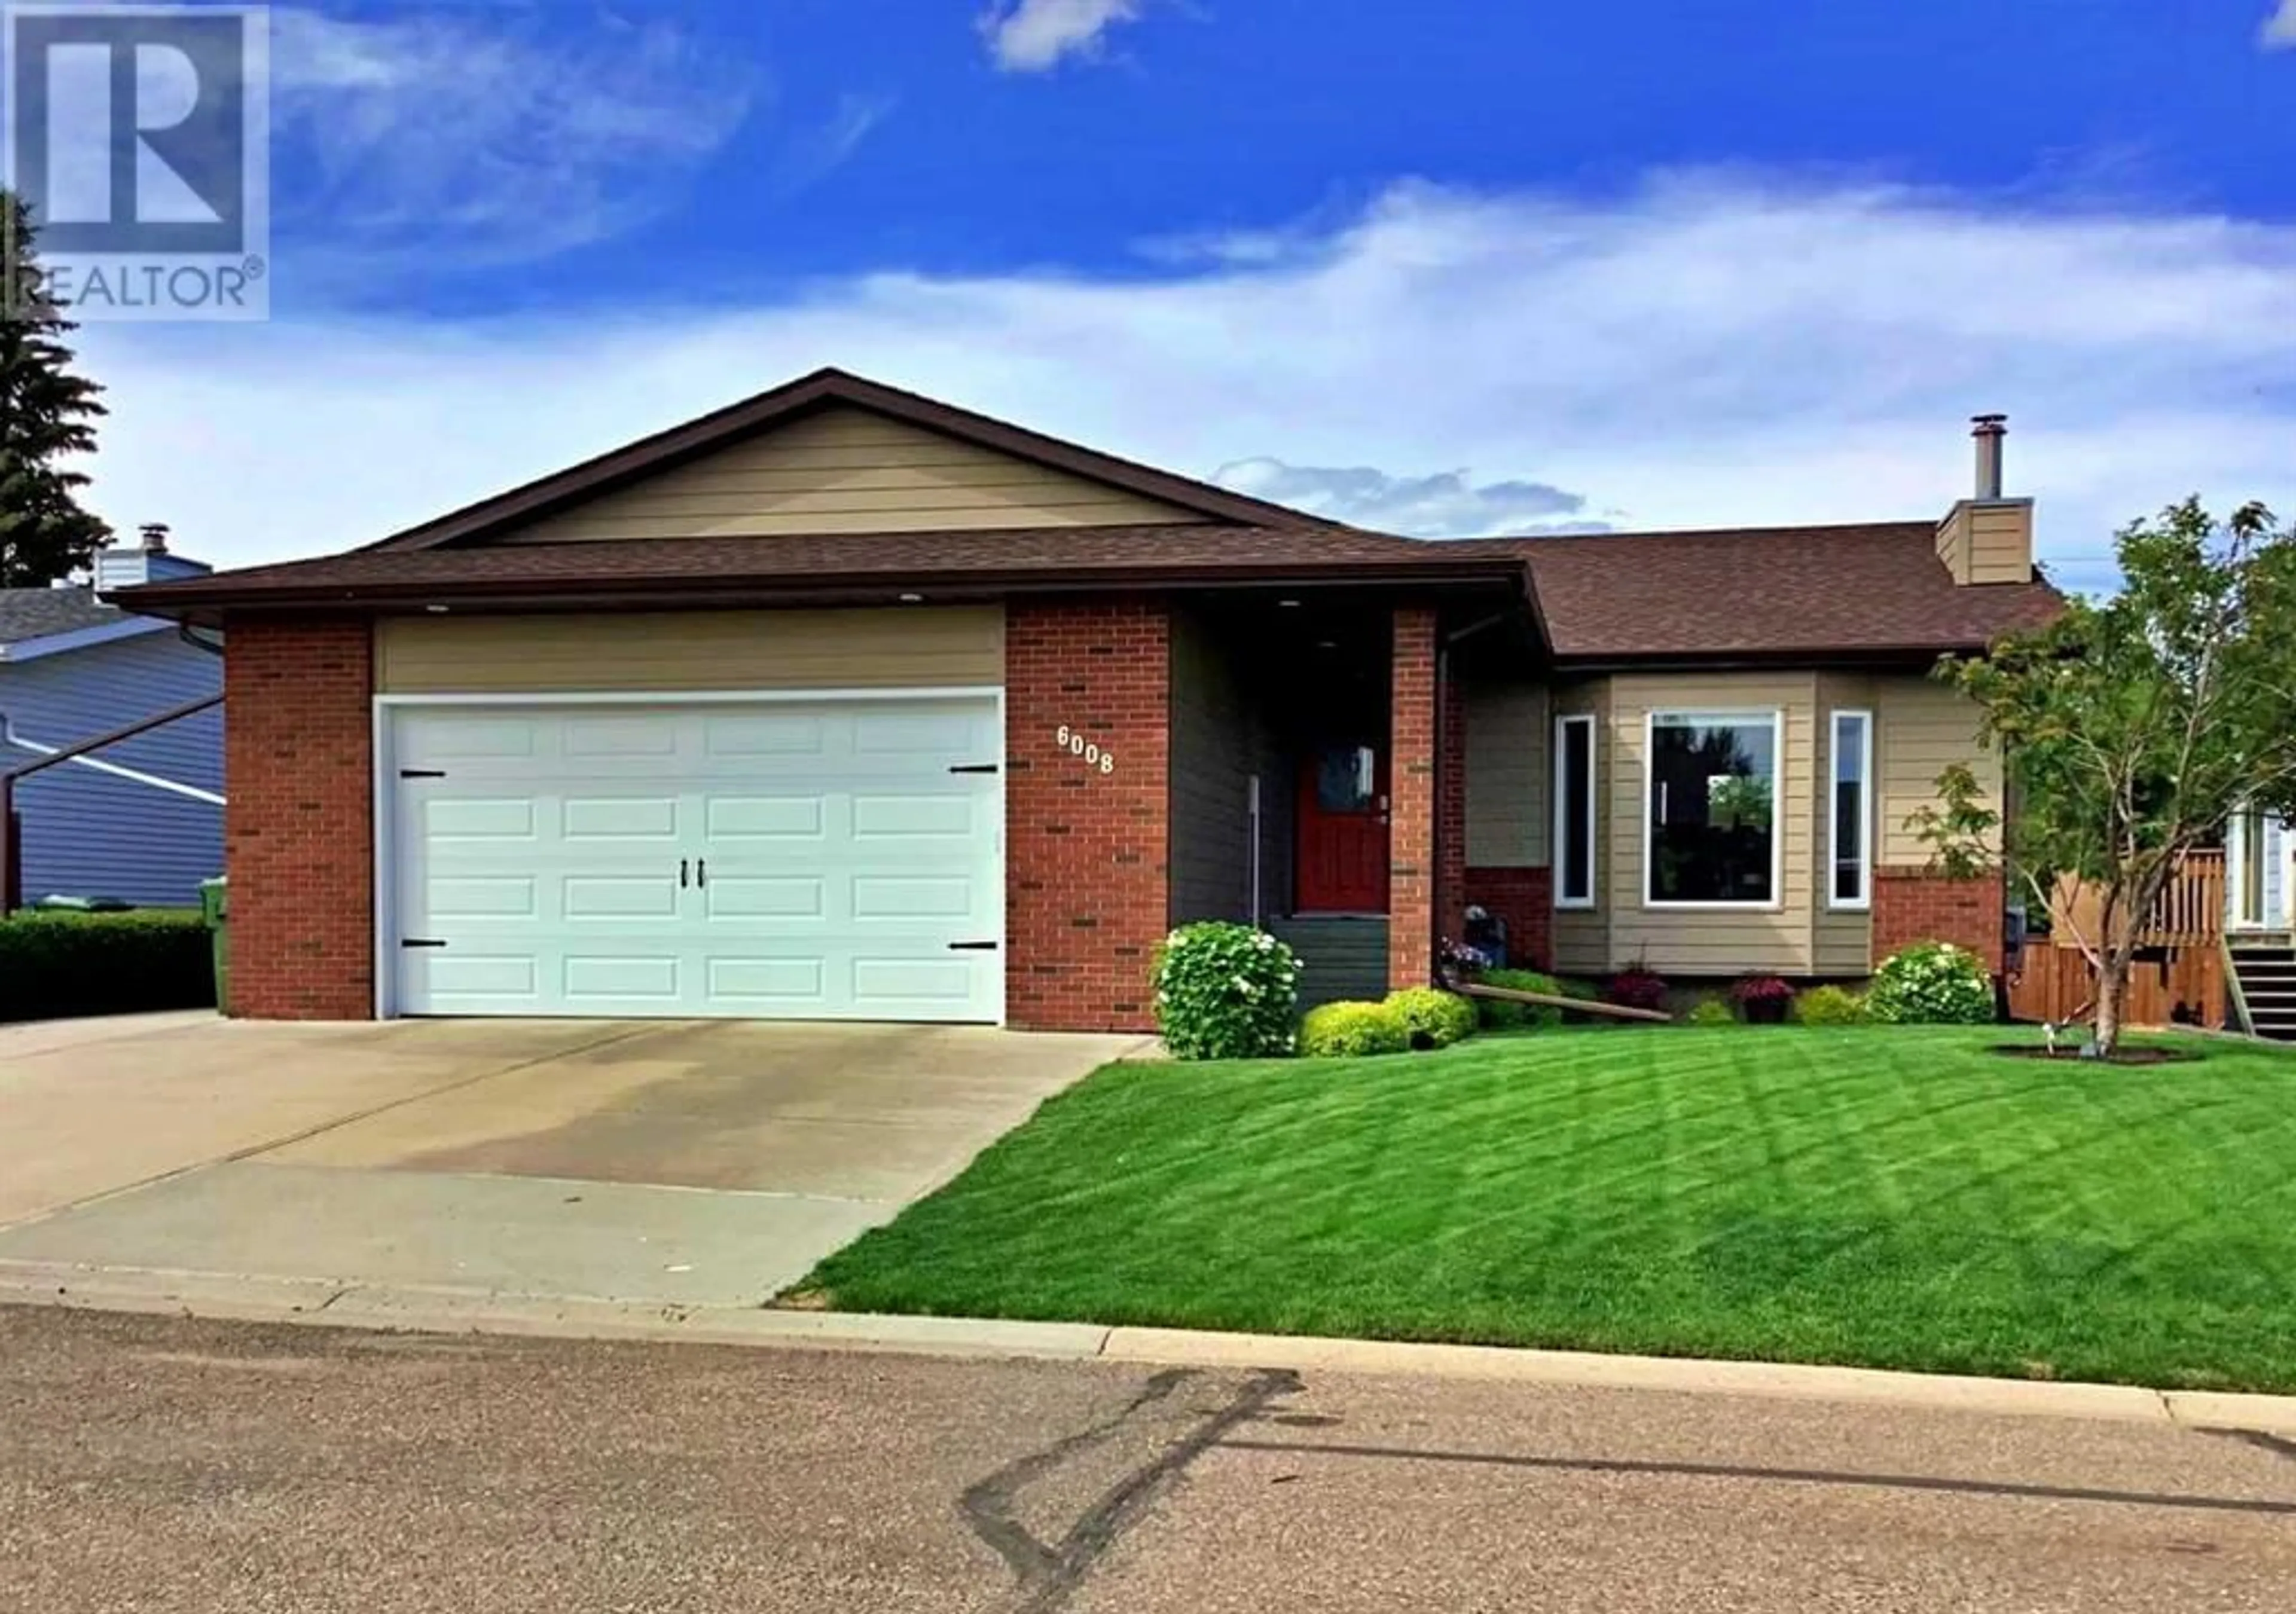 Home with brick exterior material for 6008 51 Avenue, Vermilion Alberta T9X1X2